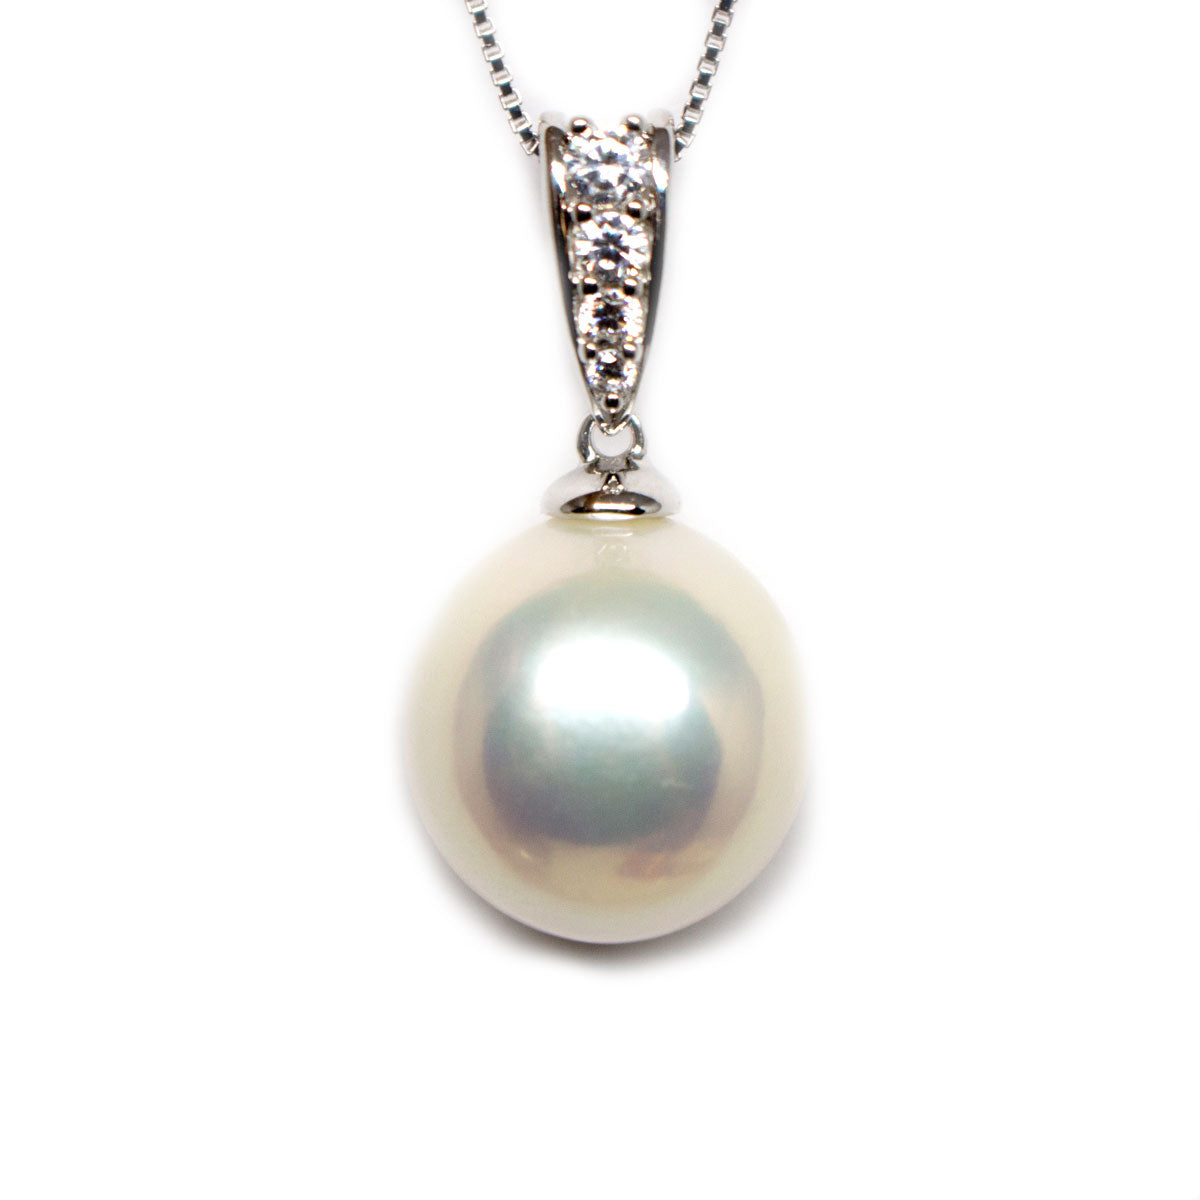 Elegant Edison Pearl Necklace - Timeless Pearl